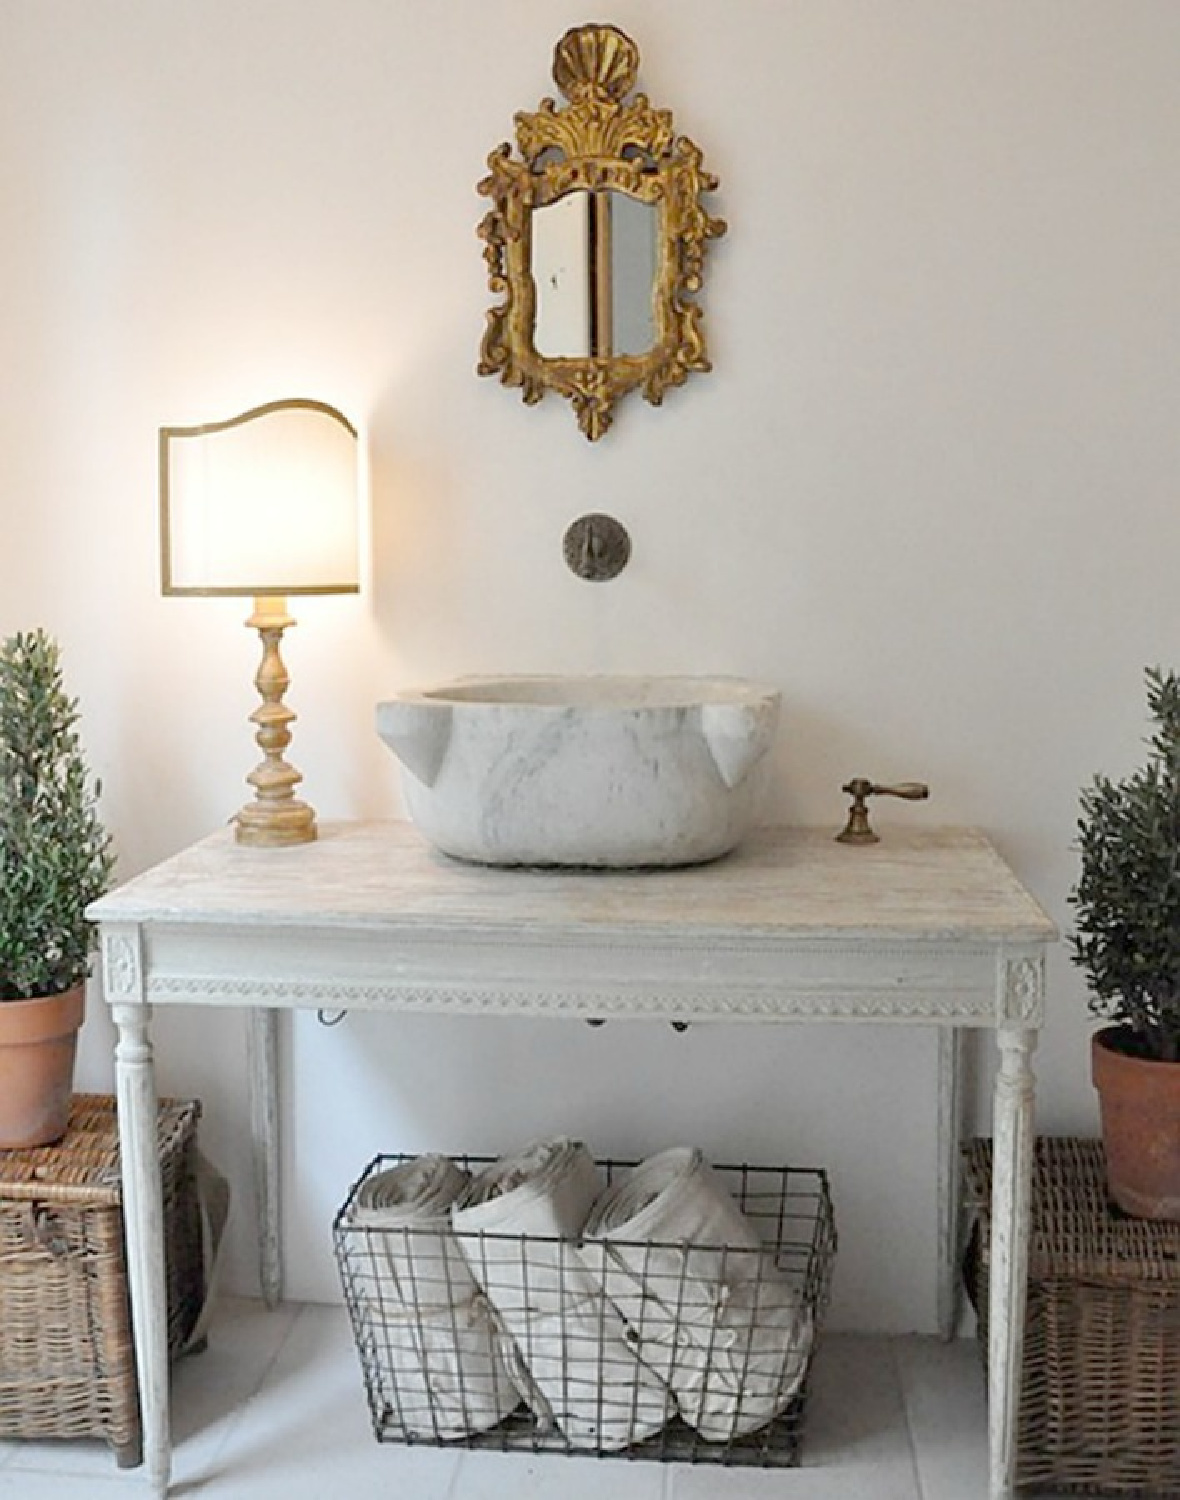 Antique table and stone sink in a bath by Brooke Giannetti. #modernfrench #europeancountry #patinastyle